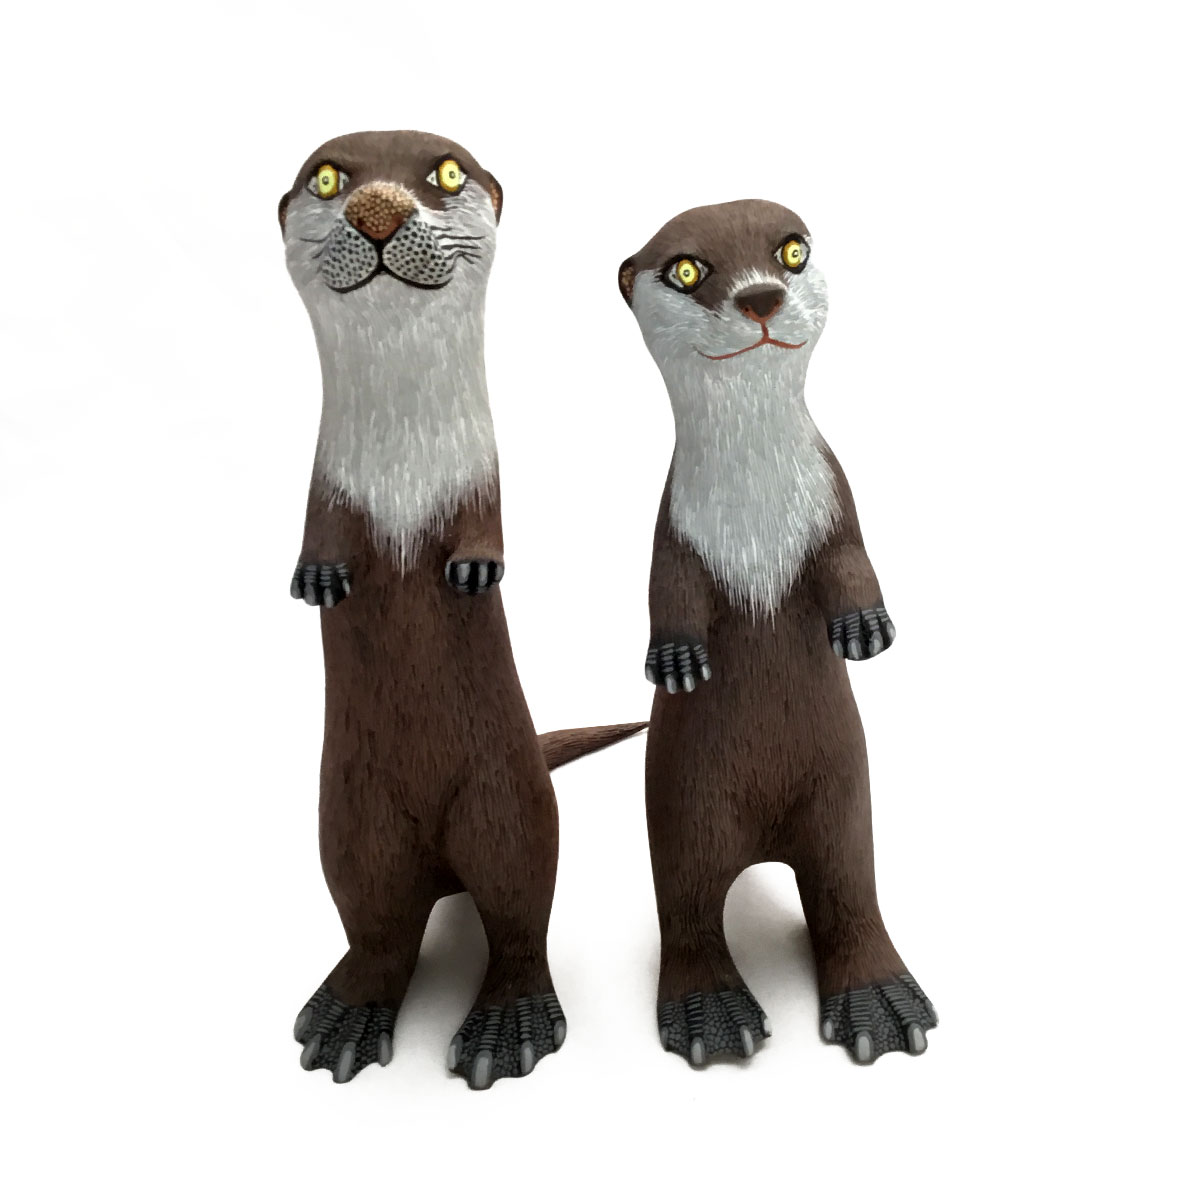 Eleazar Morales Eleazar Morales: Asian Small Clawed Otter Friends Otters